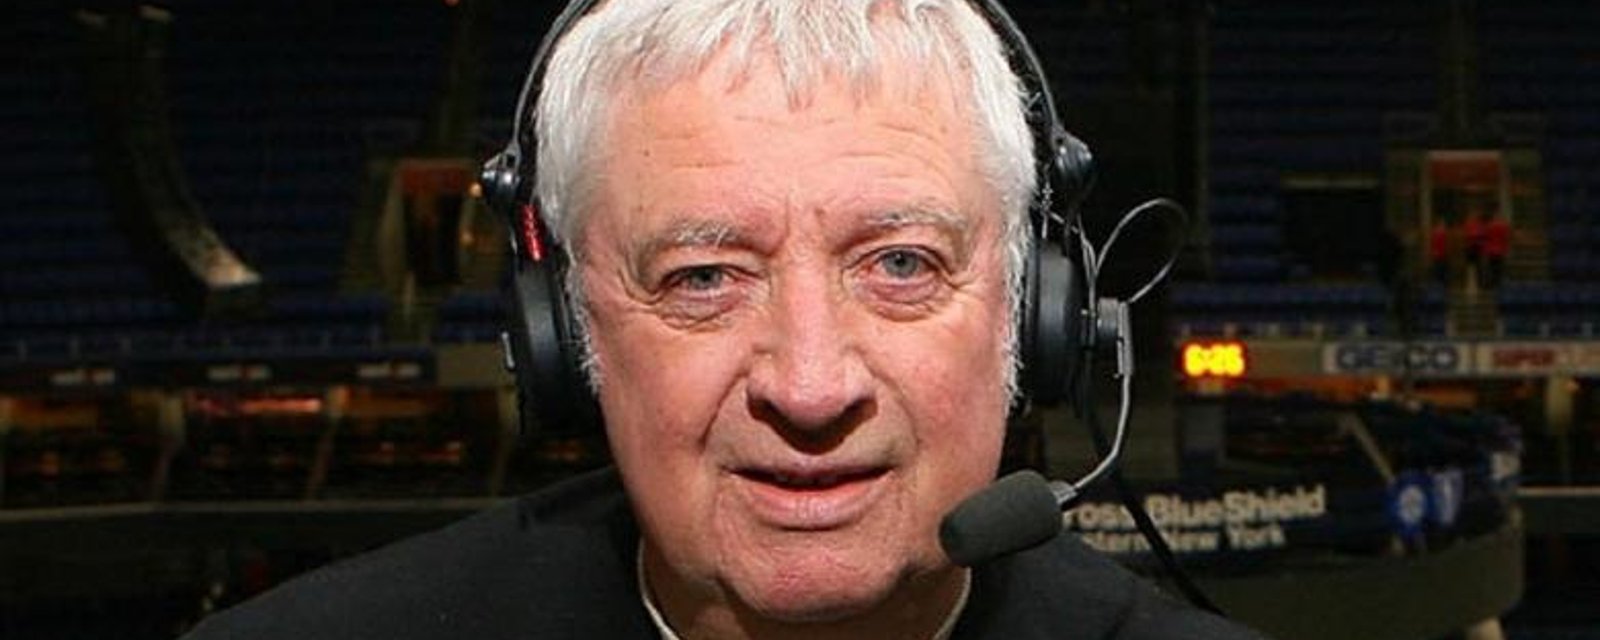 Watching Sabres' announcer Rick Jeanneret call Eichel's OT game-winner is a thing of beauty.